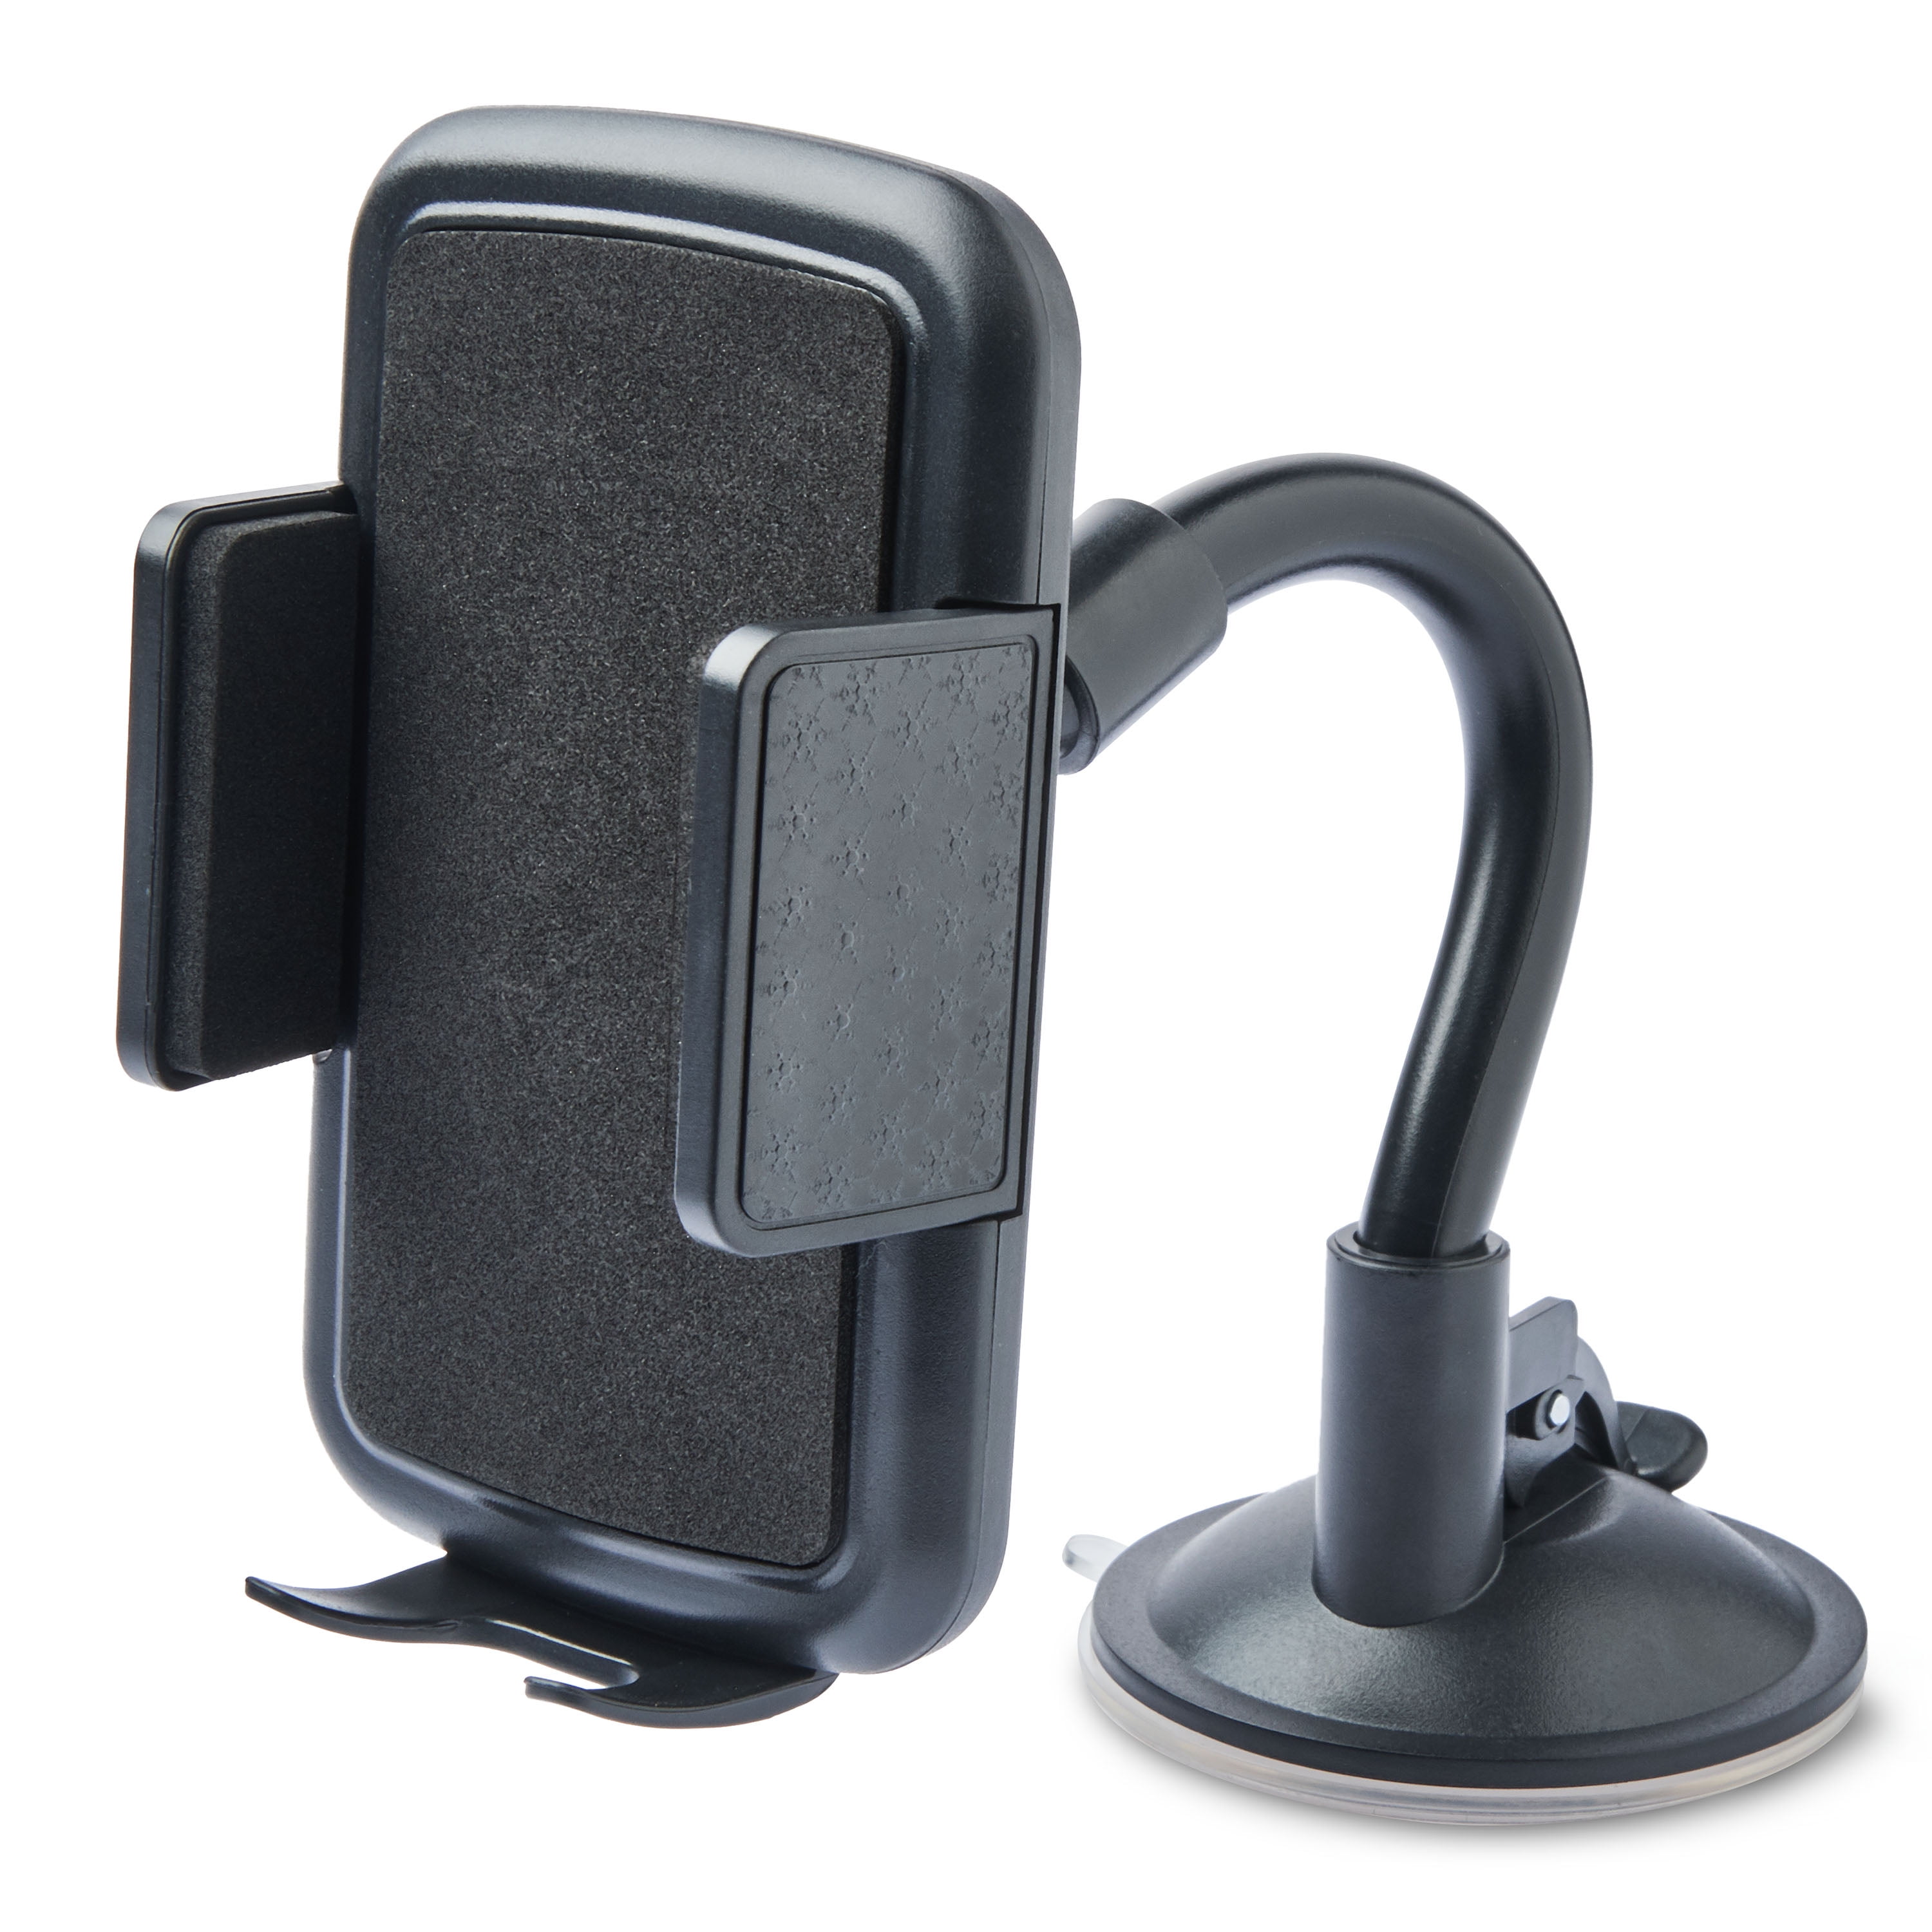 onn. Car Window or Dash Phone Mount Compatible with 2 in- 3.7 in Wide Mobile Phones